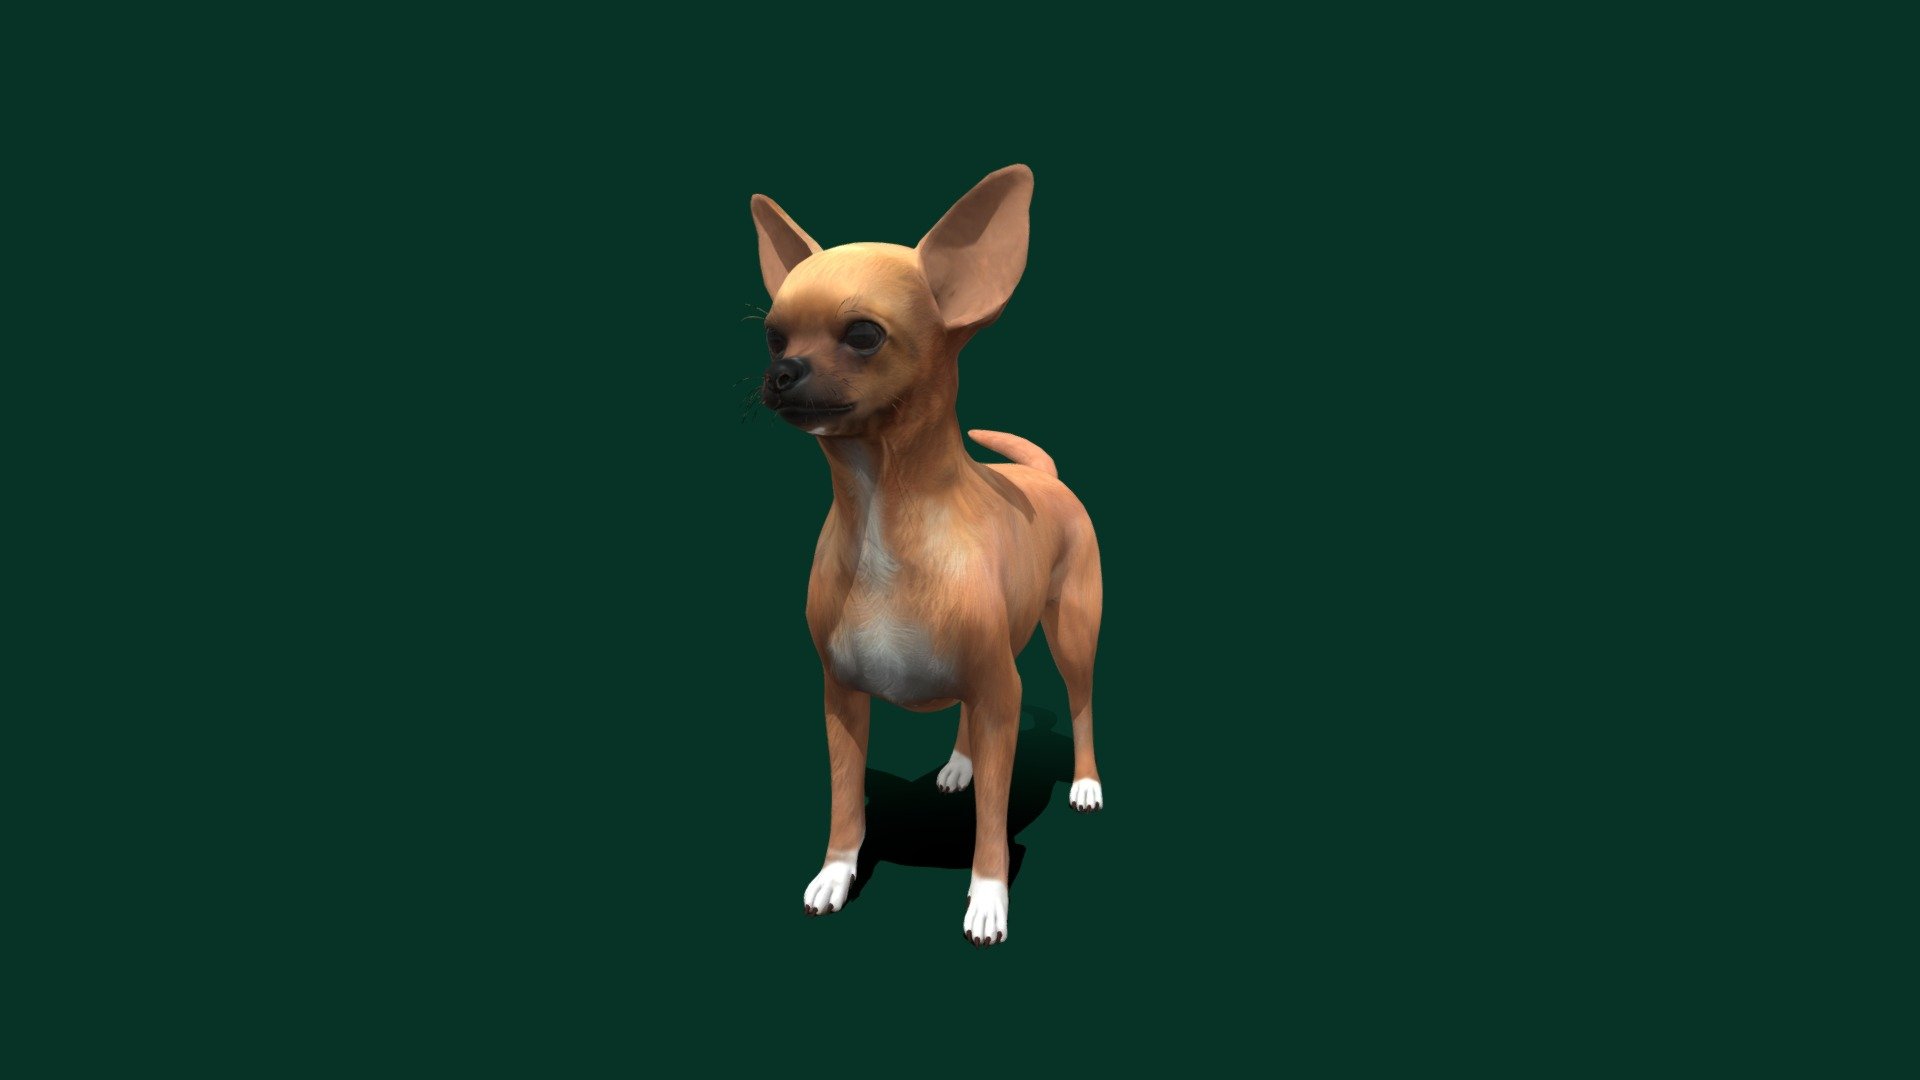 Chihuahua Version_2.2.1
The Chihuahua or Spanish: Chihuahueño is a Mexican breed of toy dog. It is named for the Mexican state of Chihuahua and is among the smallest of all dog breeds. It is usually kept as a companion animal or for showing 3d model